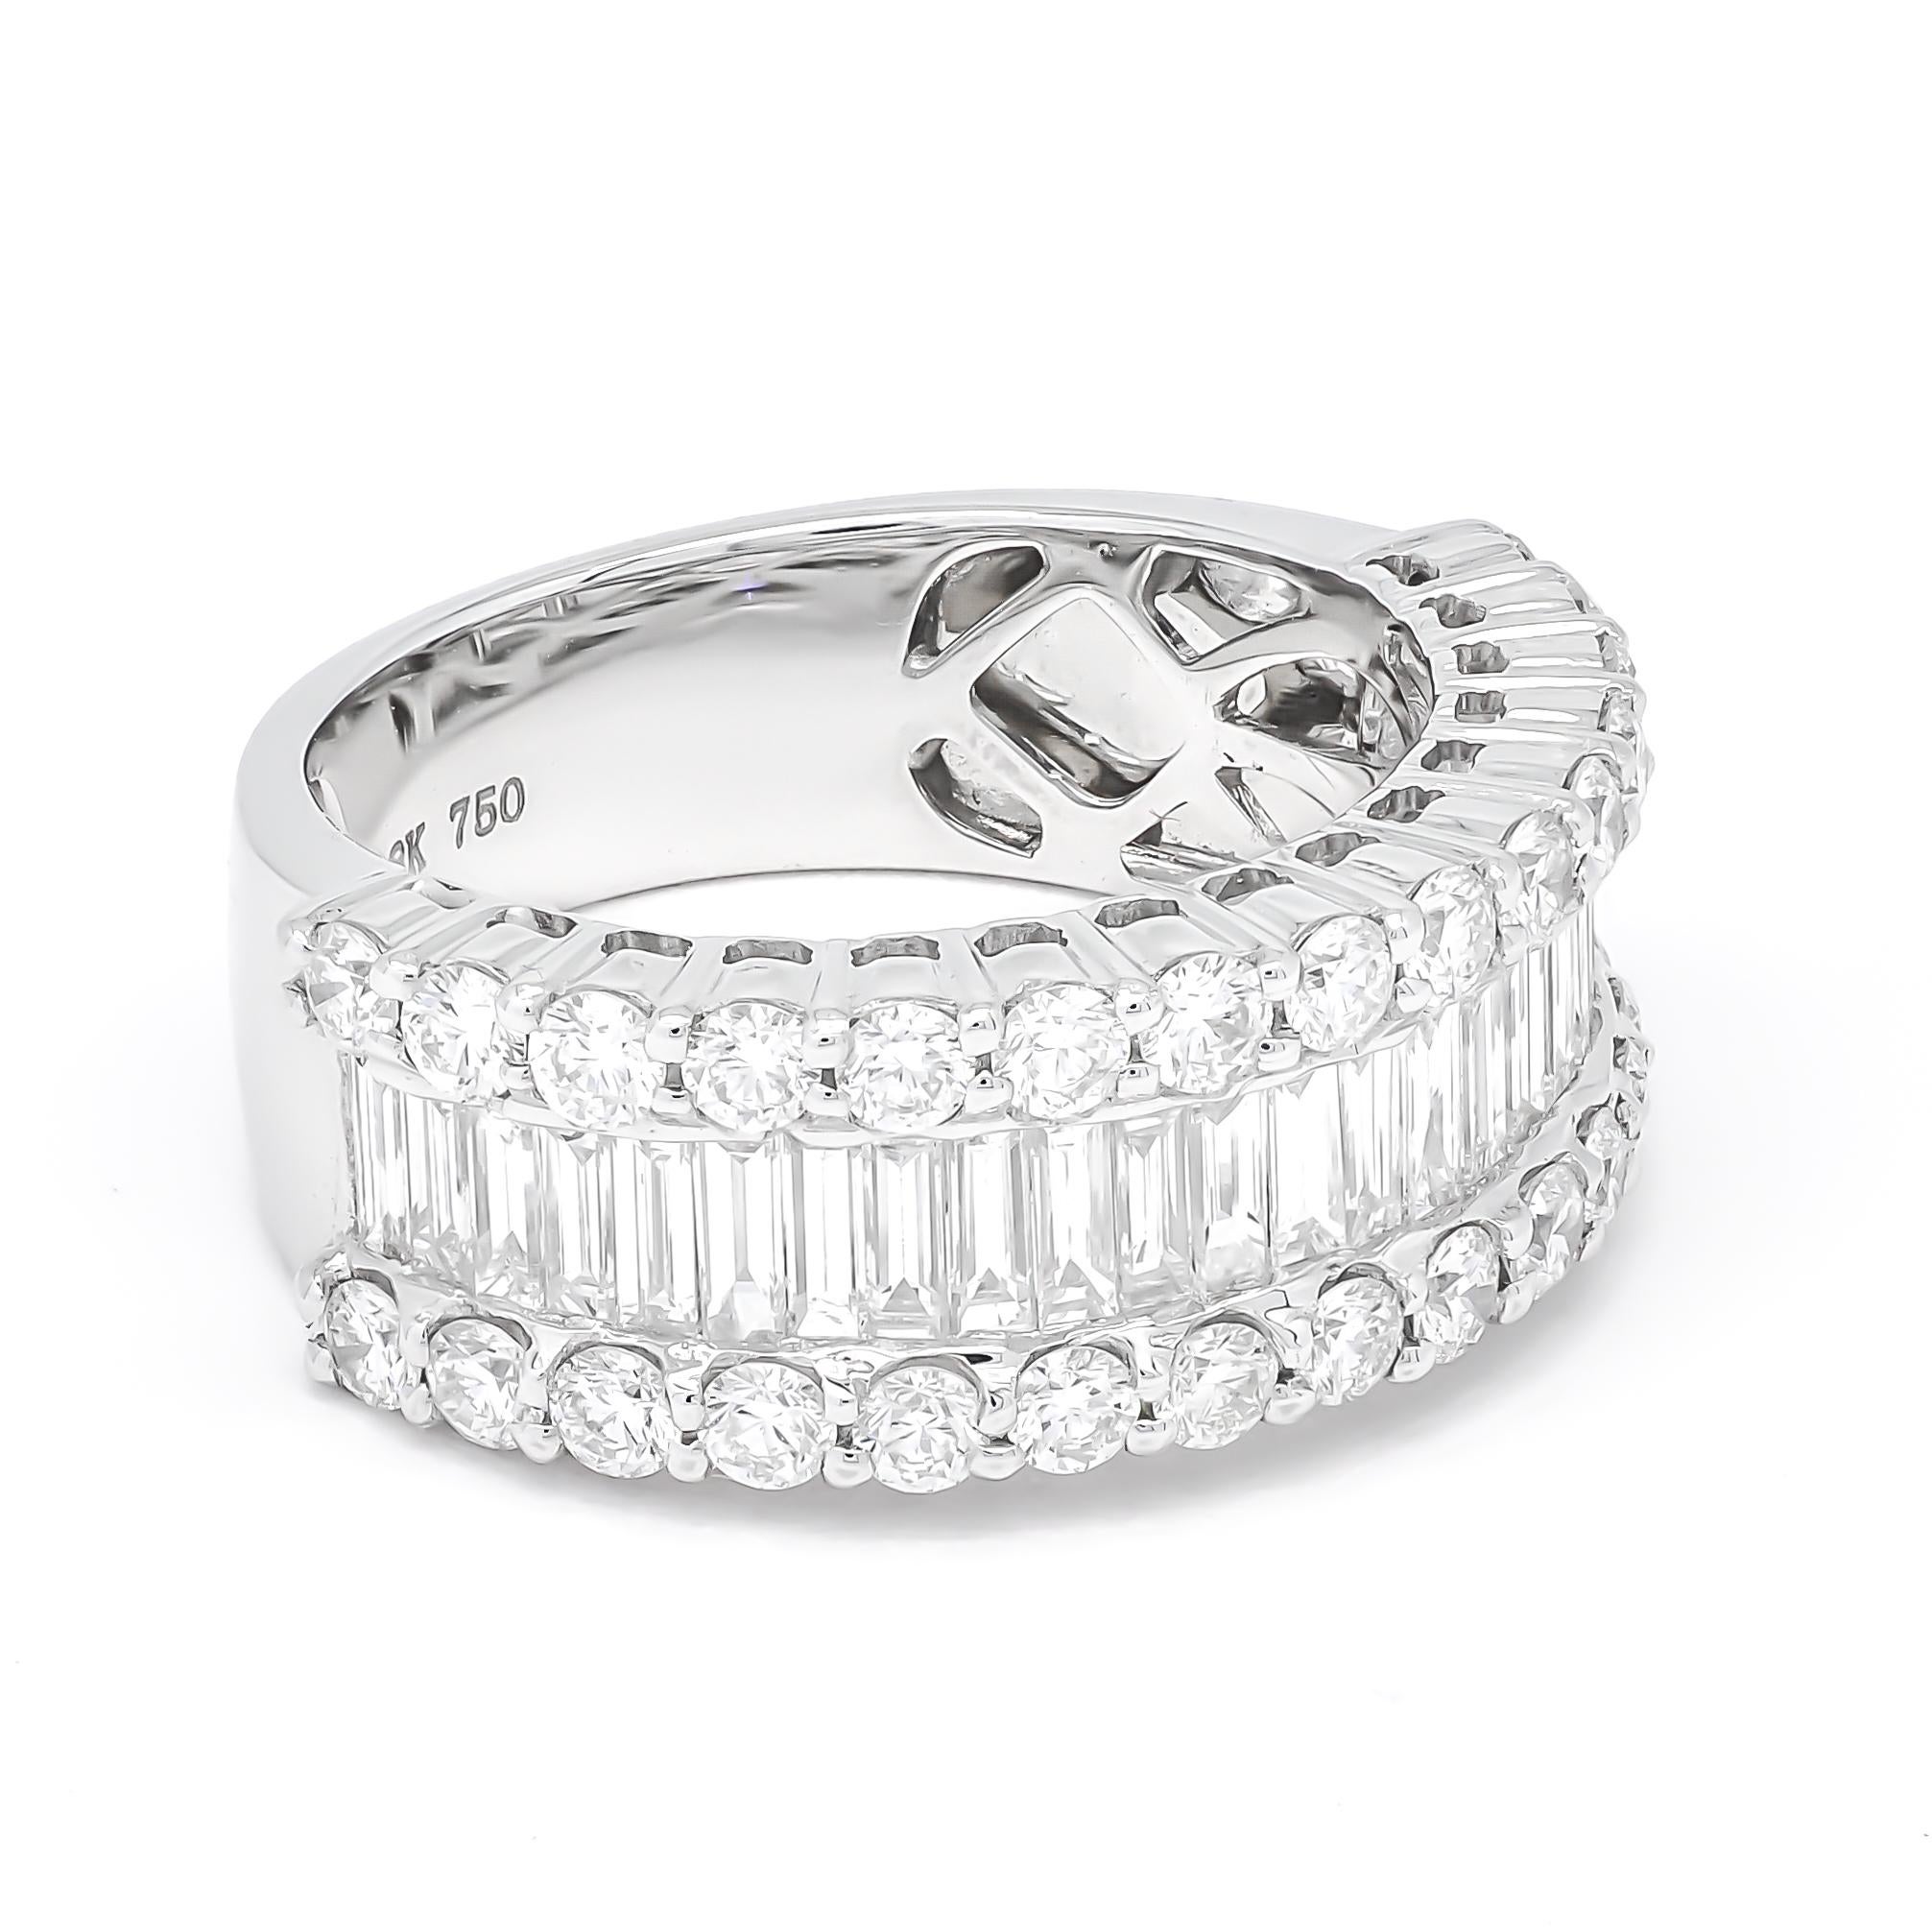 For Sale:  Natural Diamonds ct 2.30 18KT White Gold Cocktail Half Eternity Ring 5